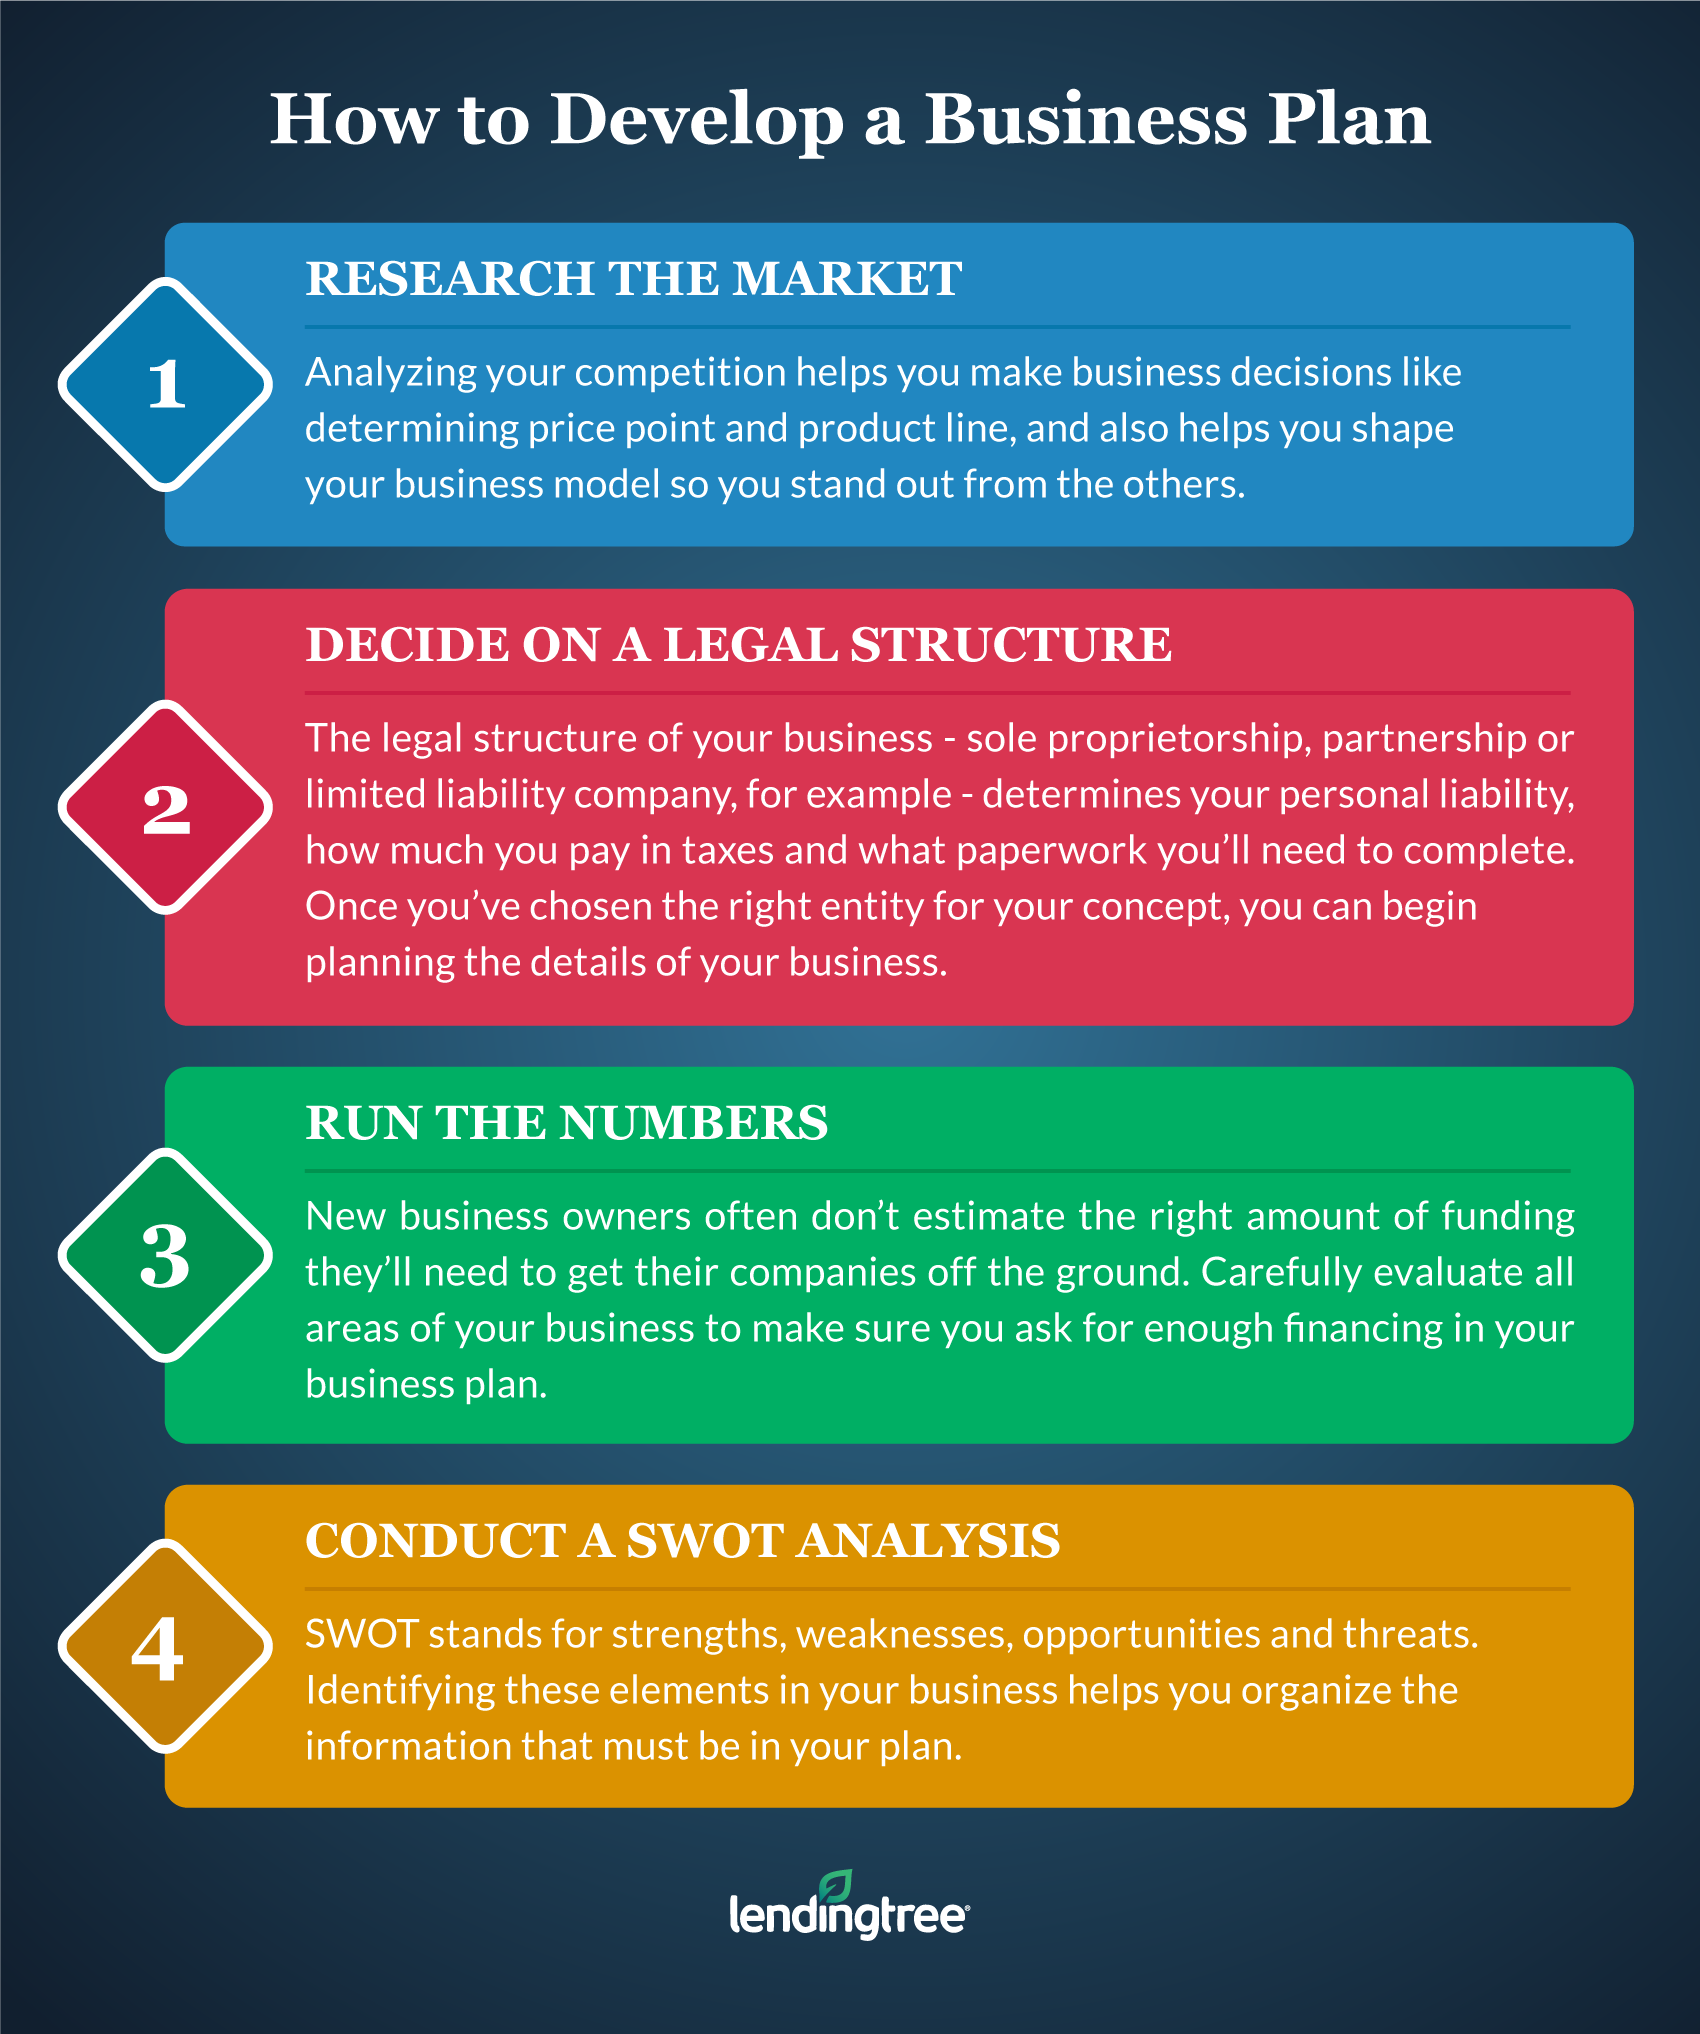 key steps in developing a business plan